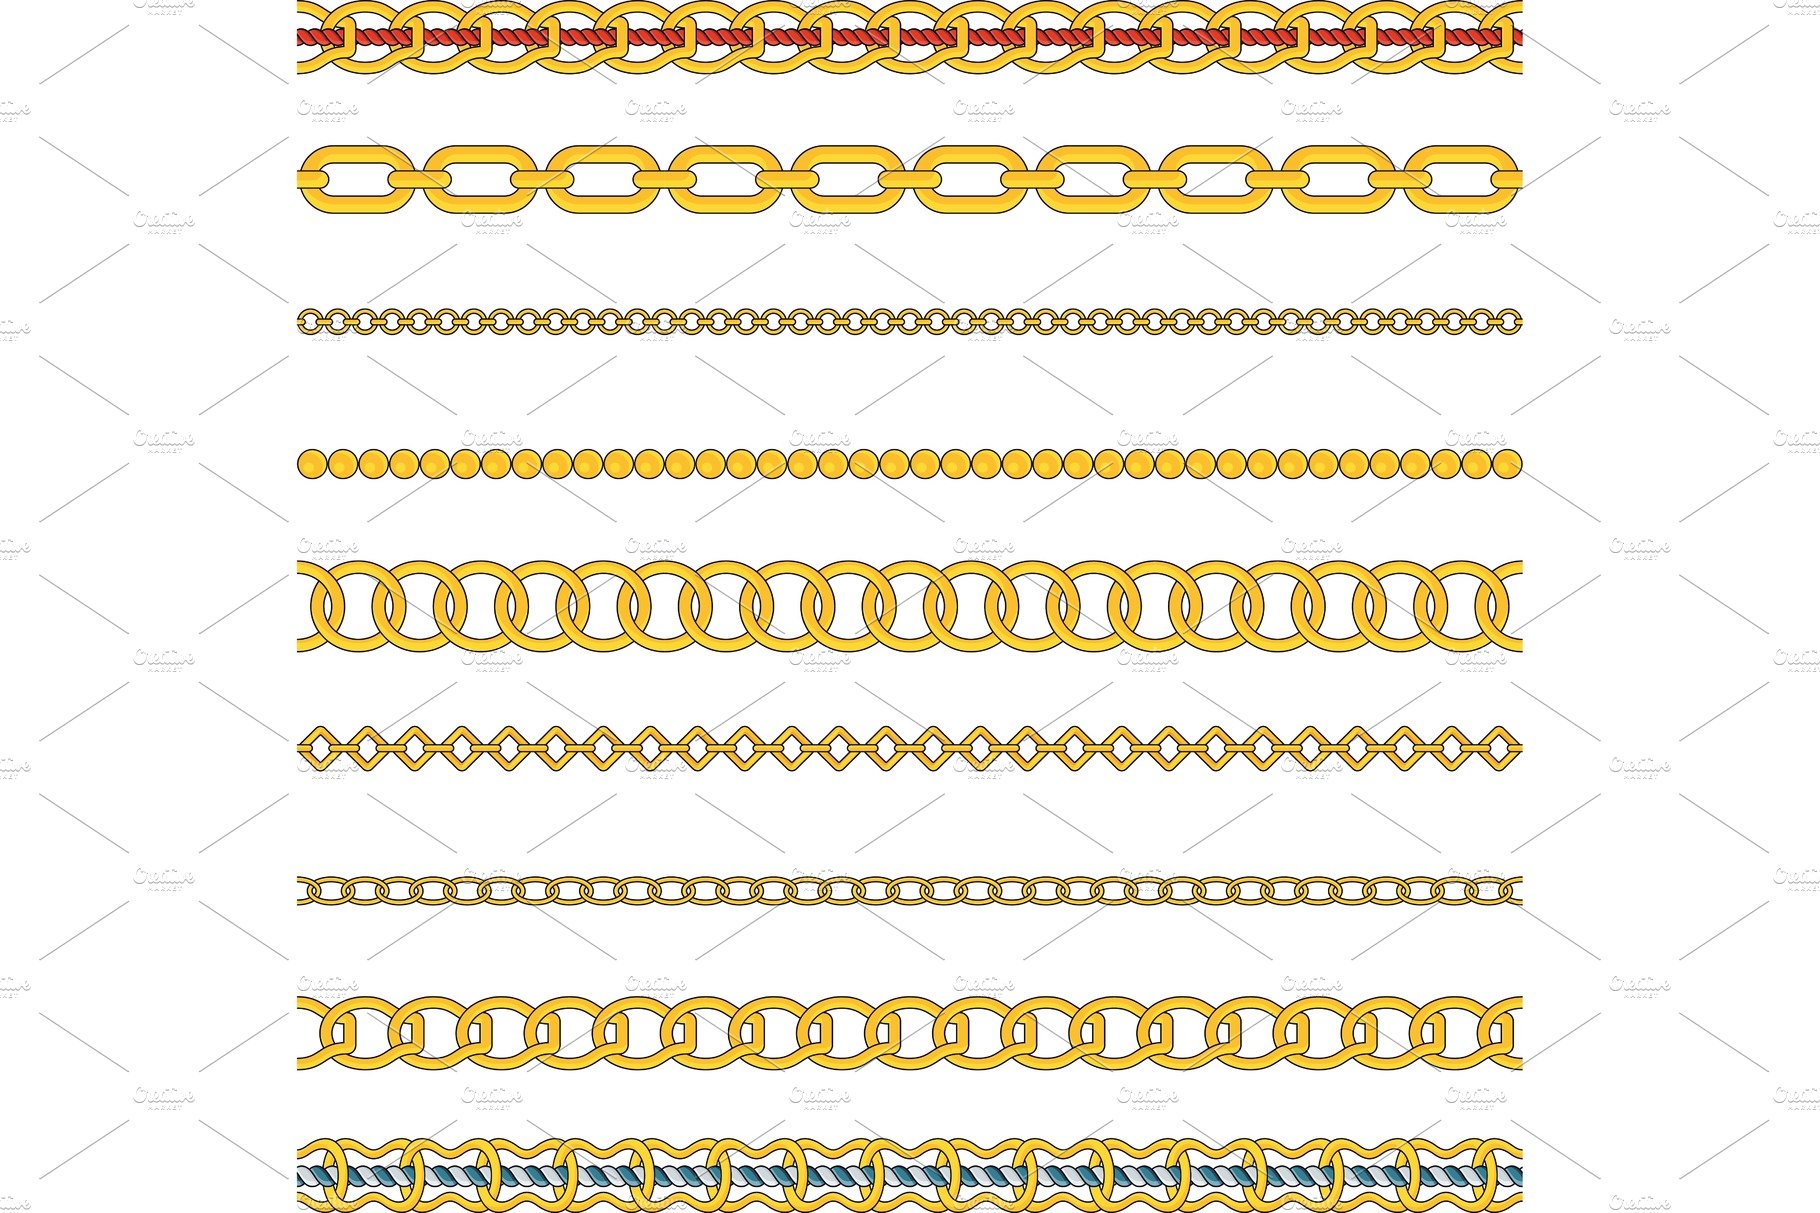 Gold chains cover image.